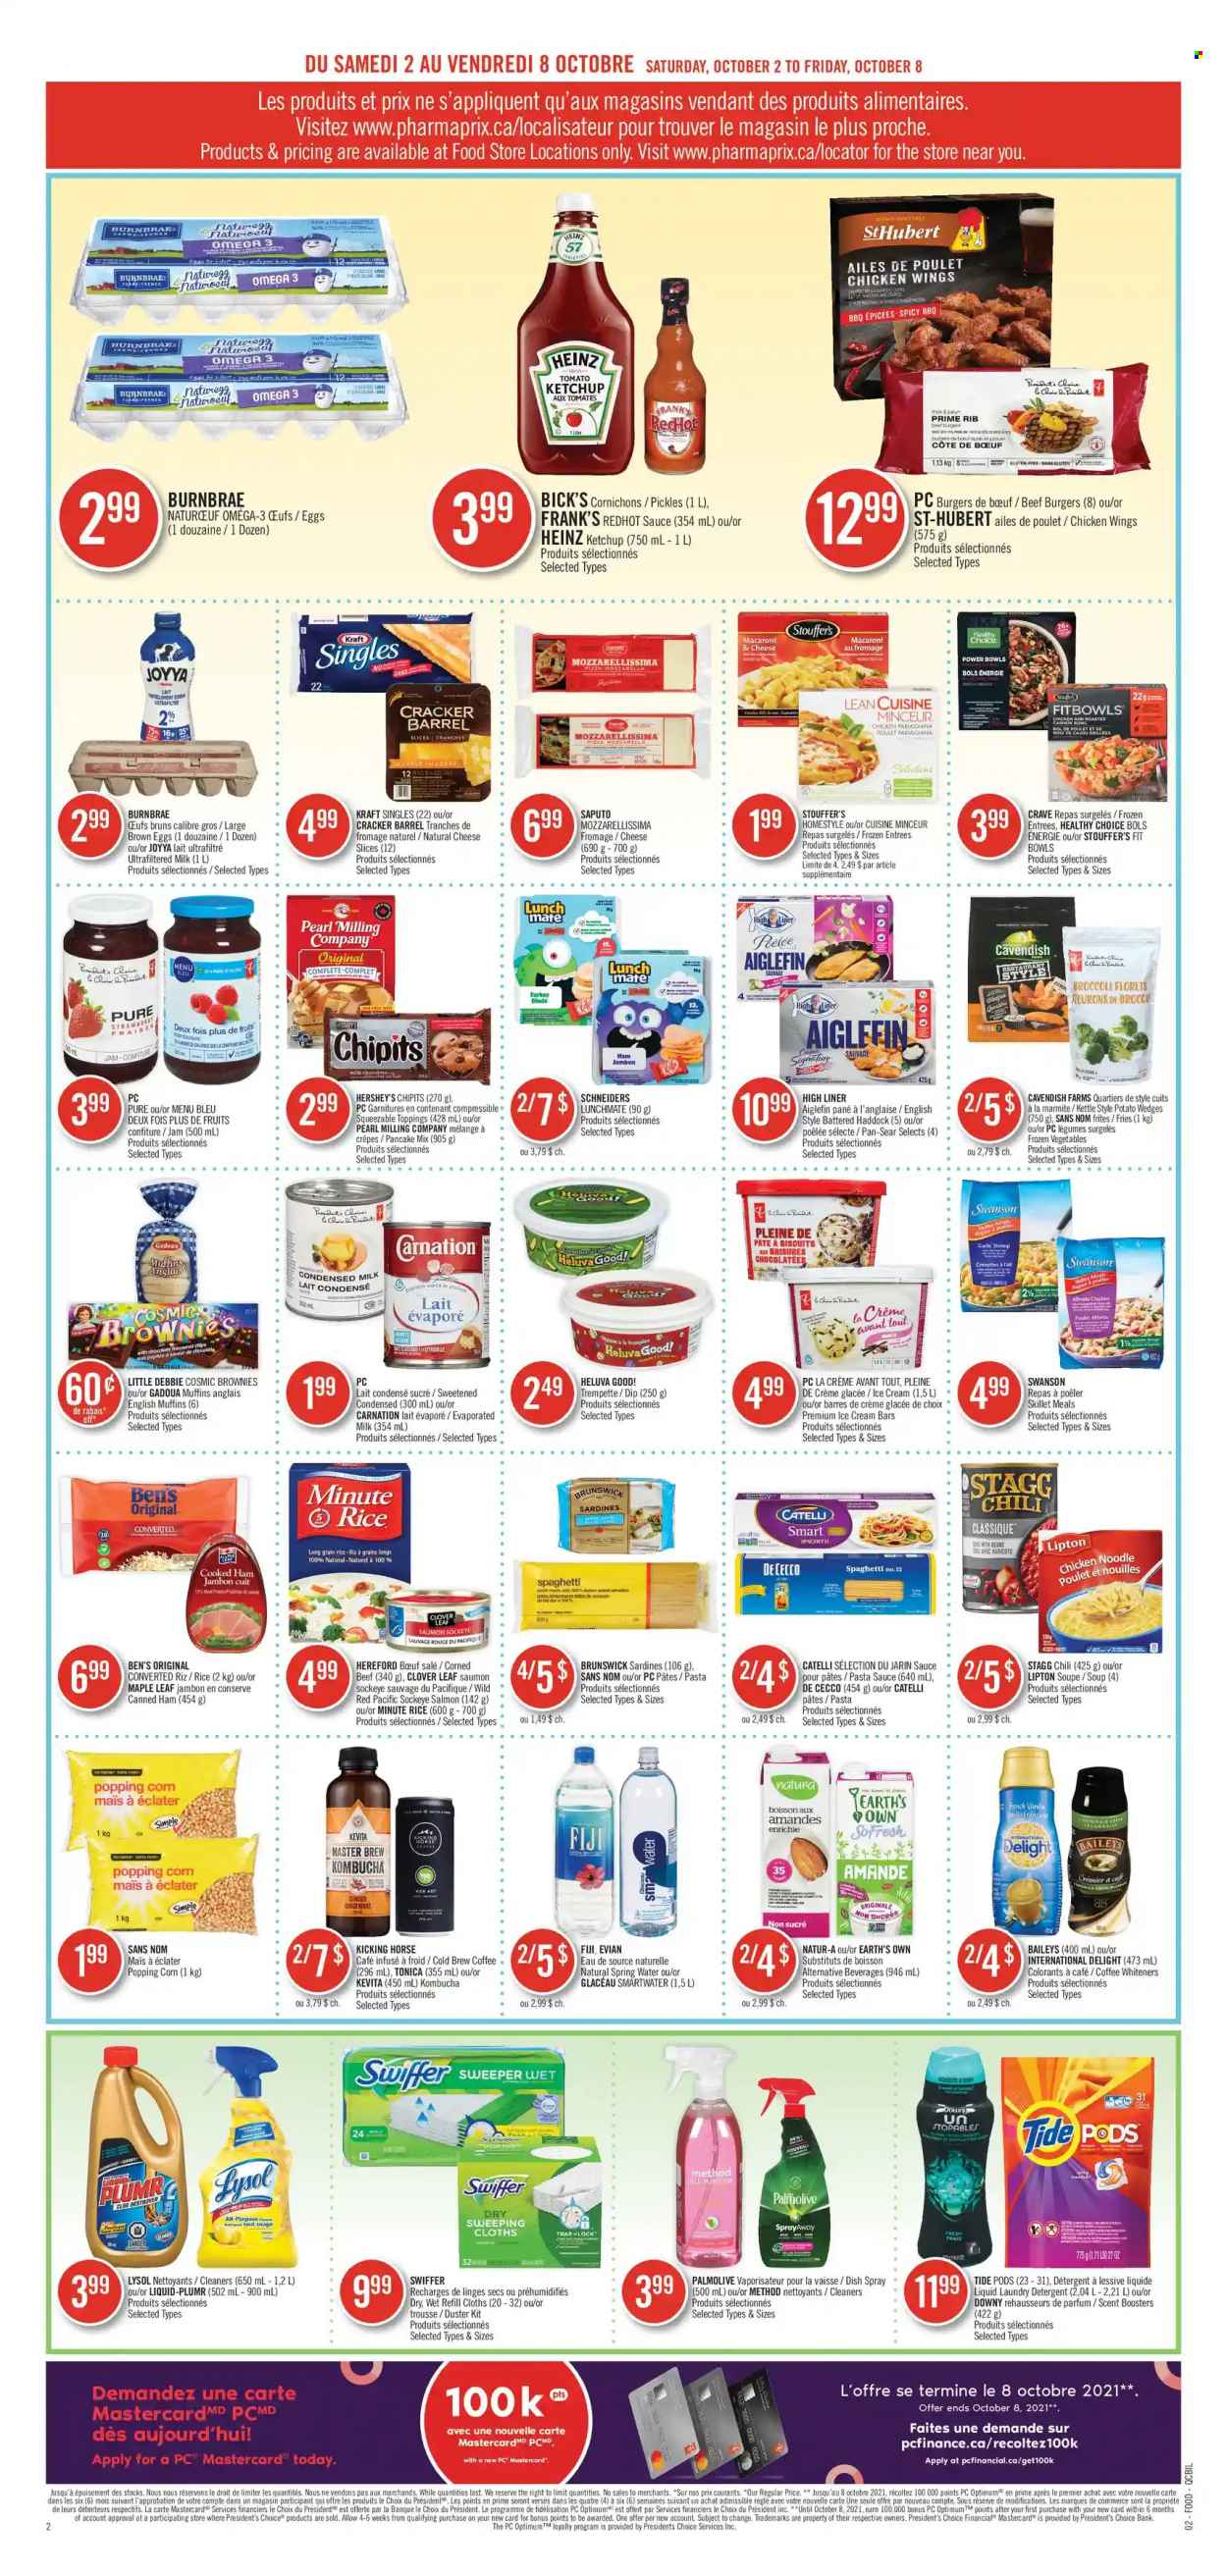 thumbnail - Pharmaprix Flyer - October 02, 2021 - October 08, 2021 - Sales products - english muffins, brownies, broccoli, corn, salmon, sardines, haddock, shrimps, macaroni & cheese, spaghetti, pizza, chicken roast, pasta sauce, soup, hamburger, sauce, pancakes, noodles, beef burger, Lean Cuisine, Healthy Choice, Kraft®, cooked ham, ham, corned beef, sandwich slices, sliced cheese, Président, Kraft Singles, Clover, evaporated milk, condensed milk, eggs, dip, ice cream, ice cream bars, Hershey's, frozen vegetables, chicken wings, Stouffer's, parmigiana, potato fries, potato wedges, crackers, biscuit, Heinz, pickles, rice, long grain rice, fruit jam, spring water, Smartwater, Evian, kombucha, KeVita, coffee, beef meat, Lysol, Swiffer, Tide, laundry detergent, scent booster, Palmolive, duster, pan, bowl, Omega-3, detergent, ketchup, Lipton. Page 6.